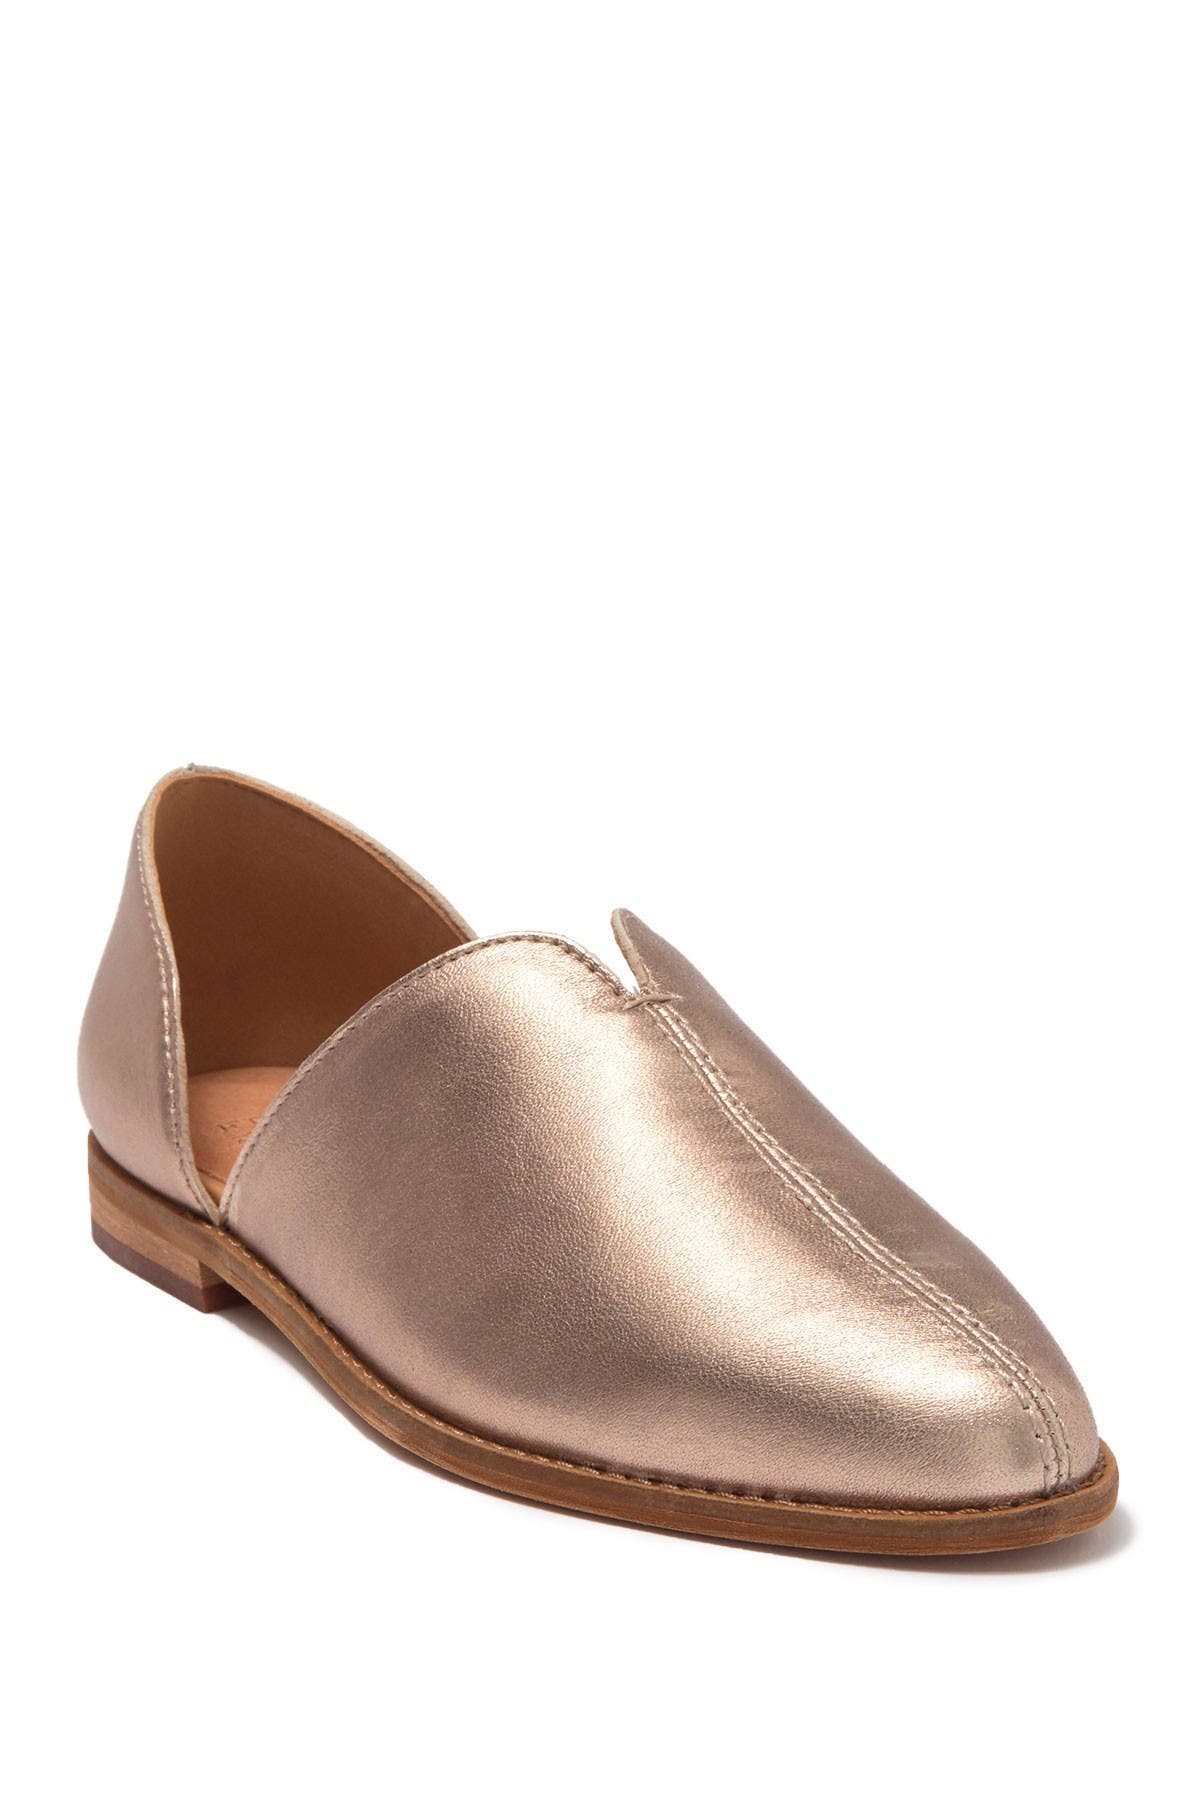 frye and co flats